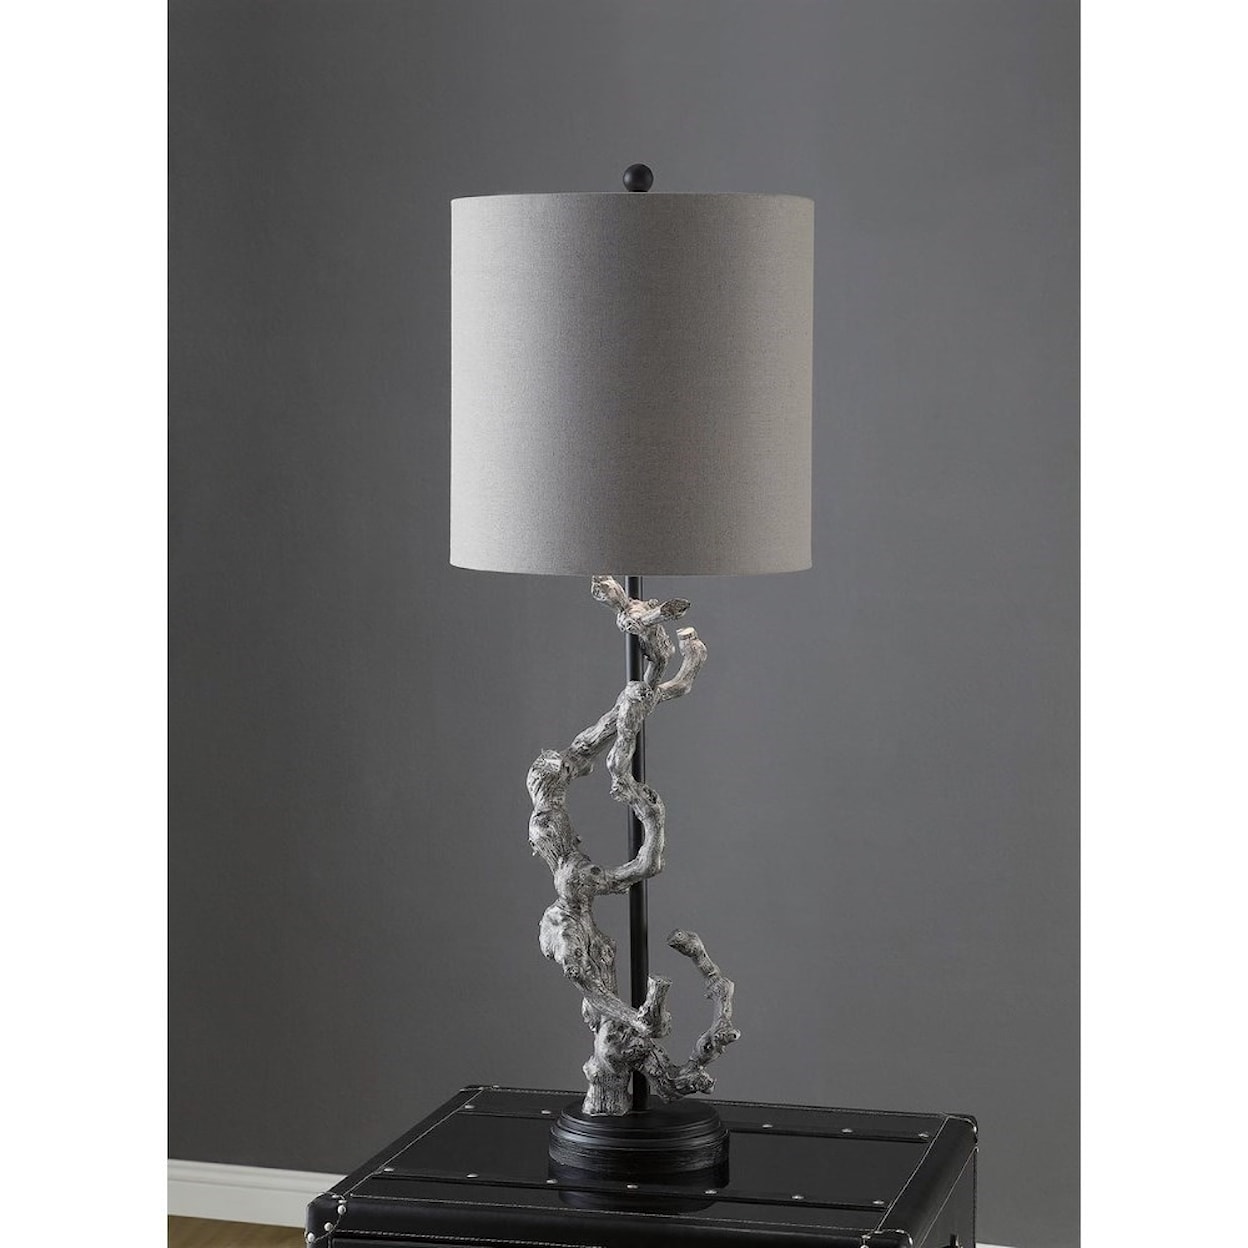 Crestview Collection Lighting Twisted Branch Table Lamp 43.5"Ht